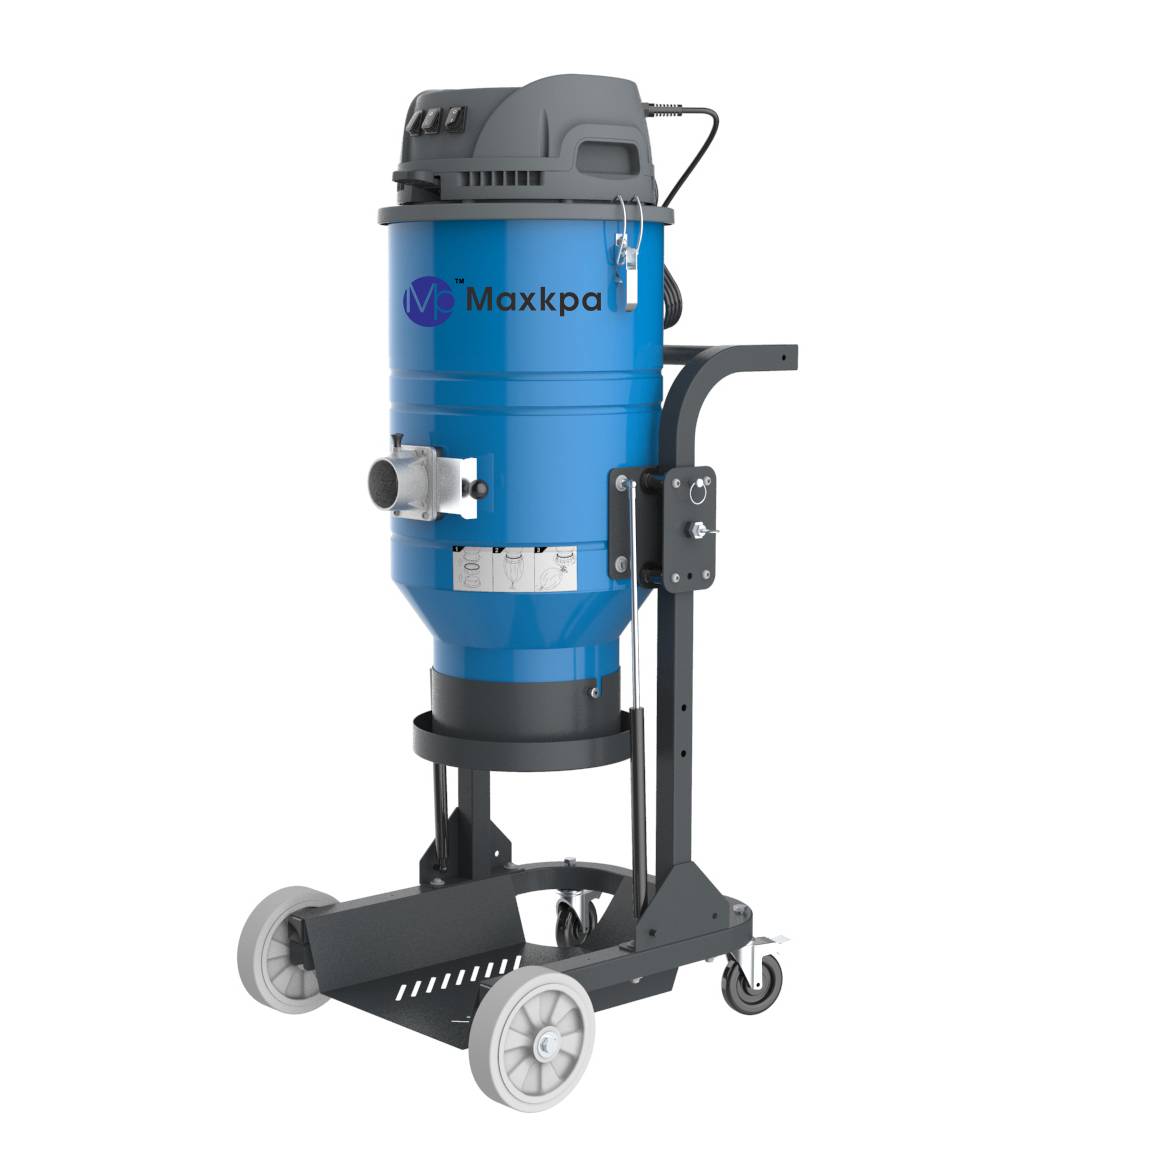 TS3000 Single phase HEPA dust extractor Featured Image